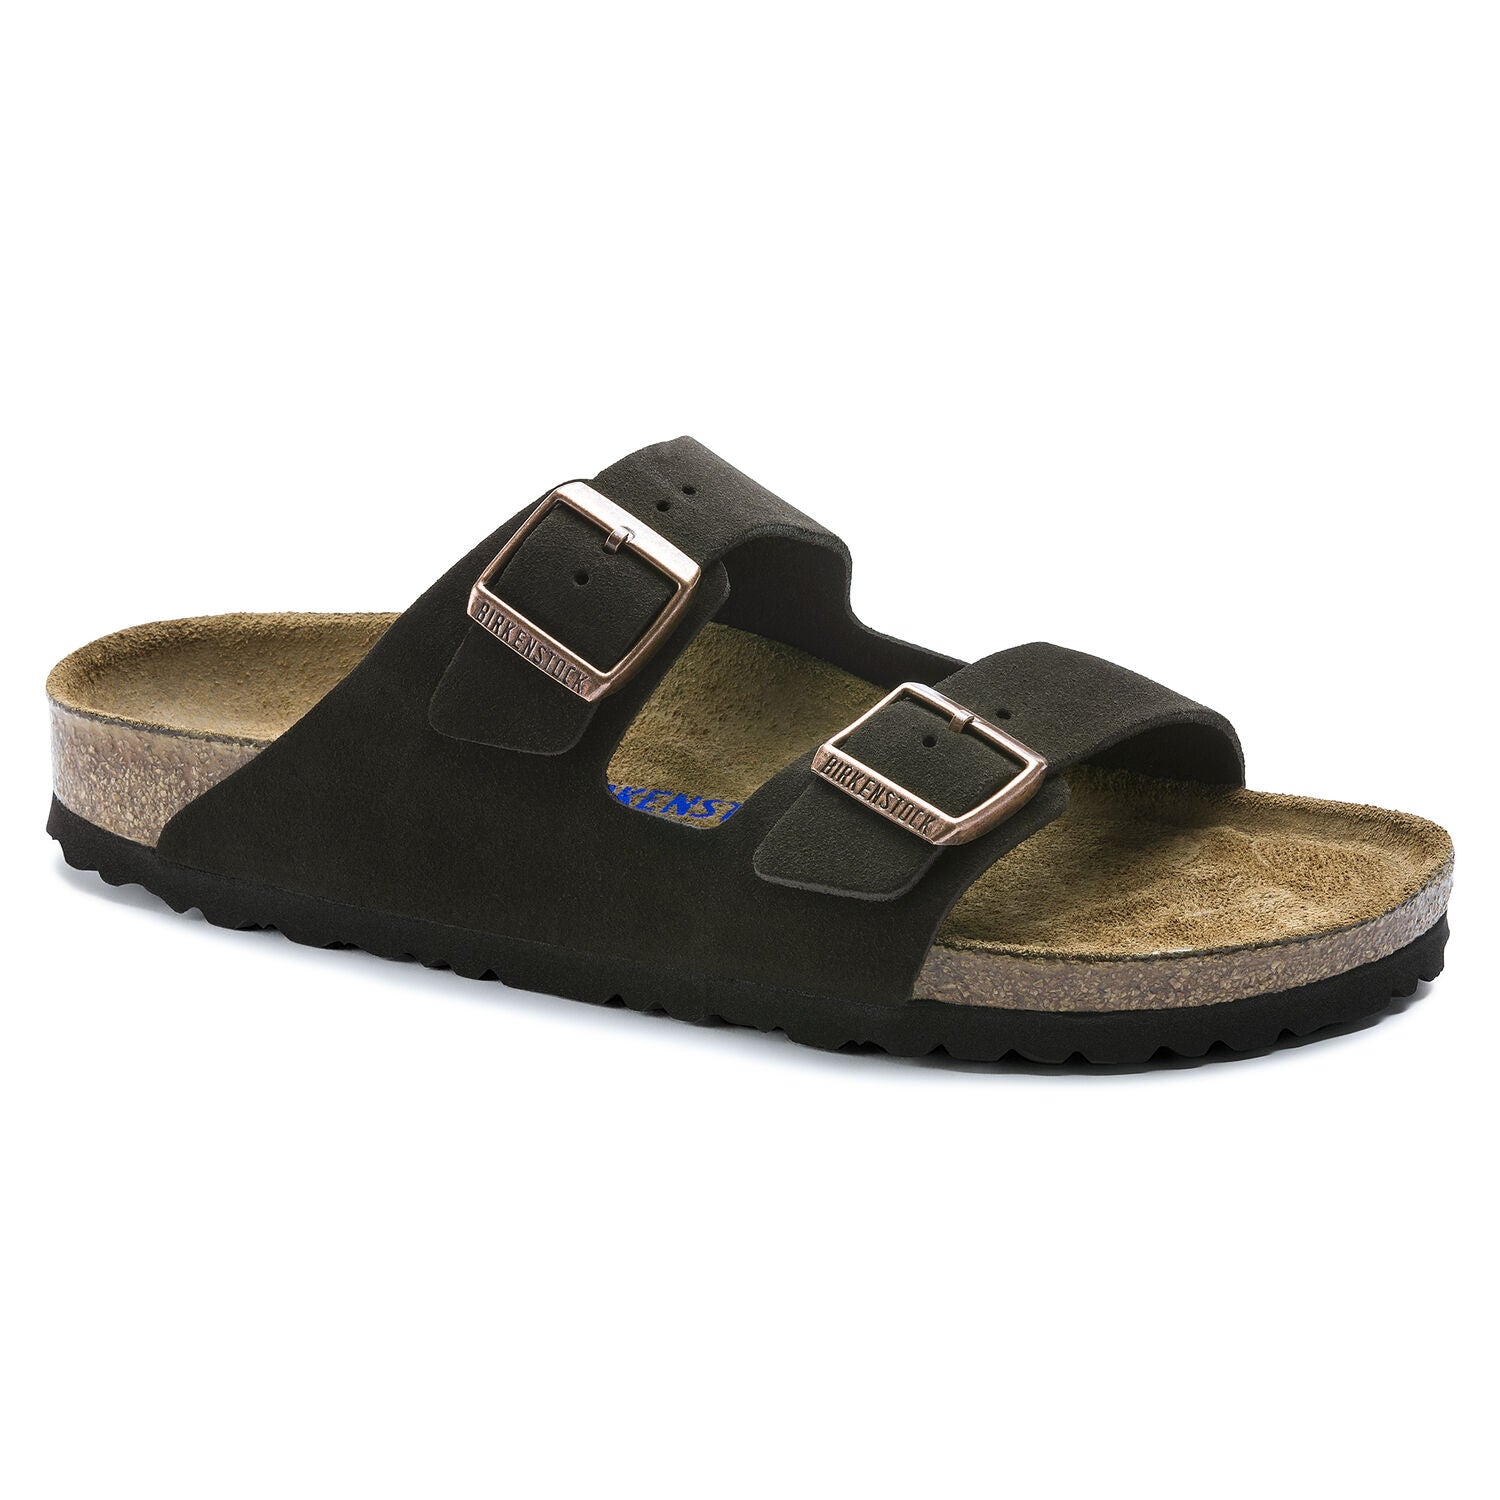 Birkenstock Arizona with soft footbed and suede leather upper. Color is mocha..